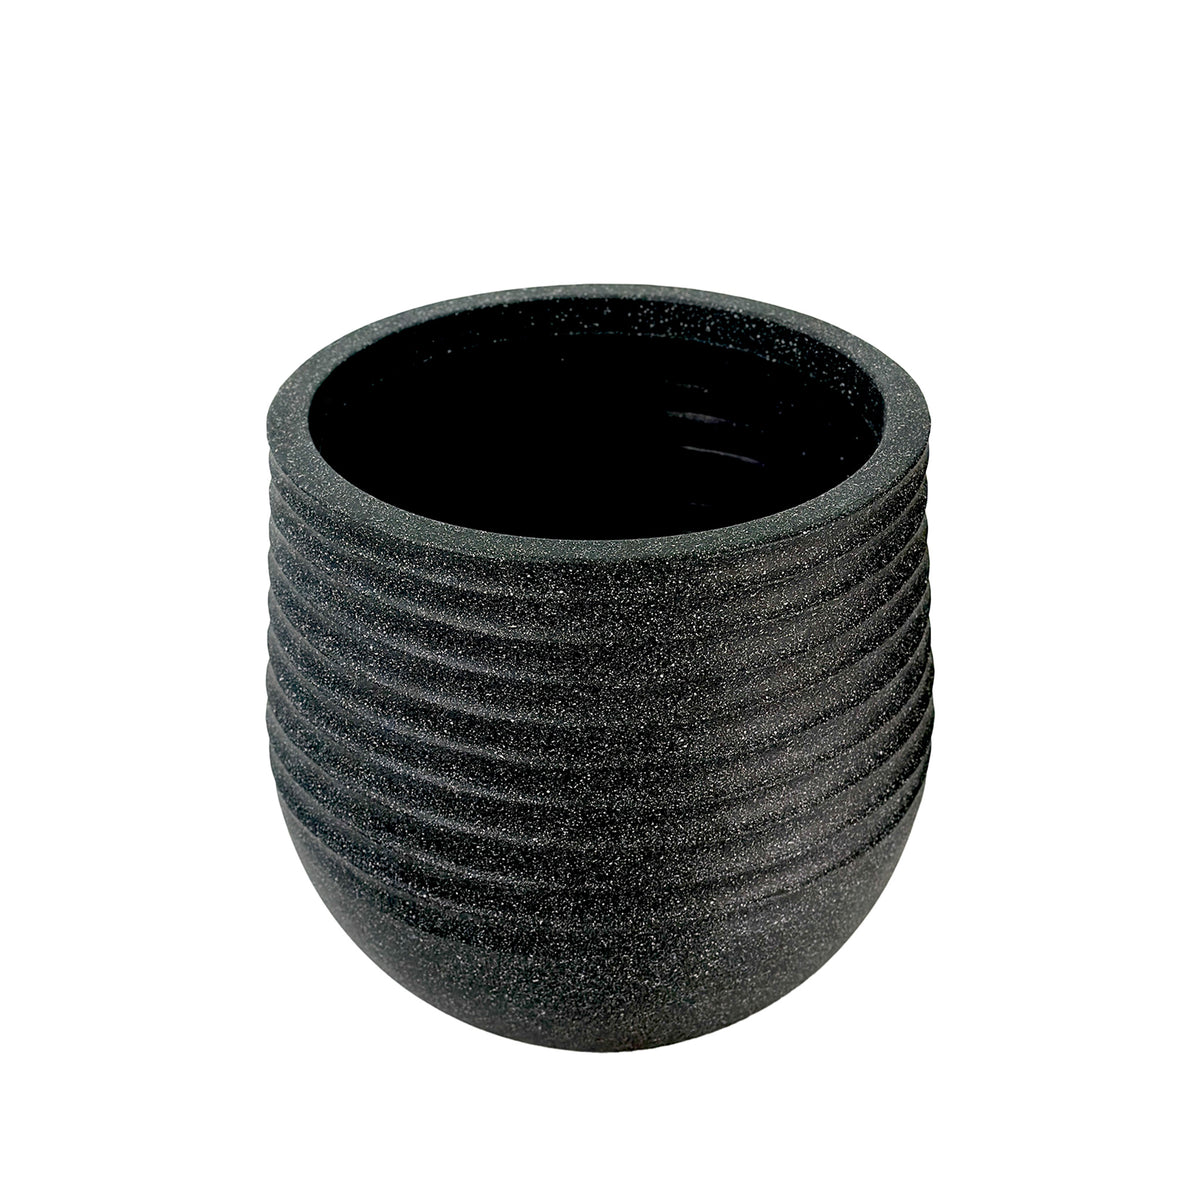 40 cm Poly-resin, Medium Ribbed planter, Mediterranean Black with a terrazzo finish, Lightweight, Weather resistant and eco friendly, Front view.